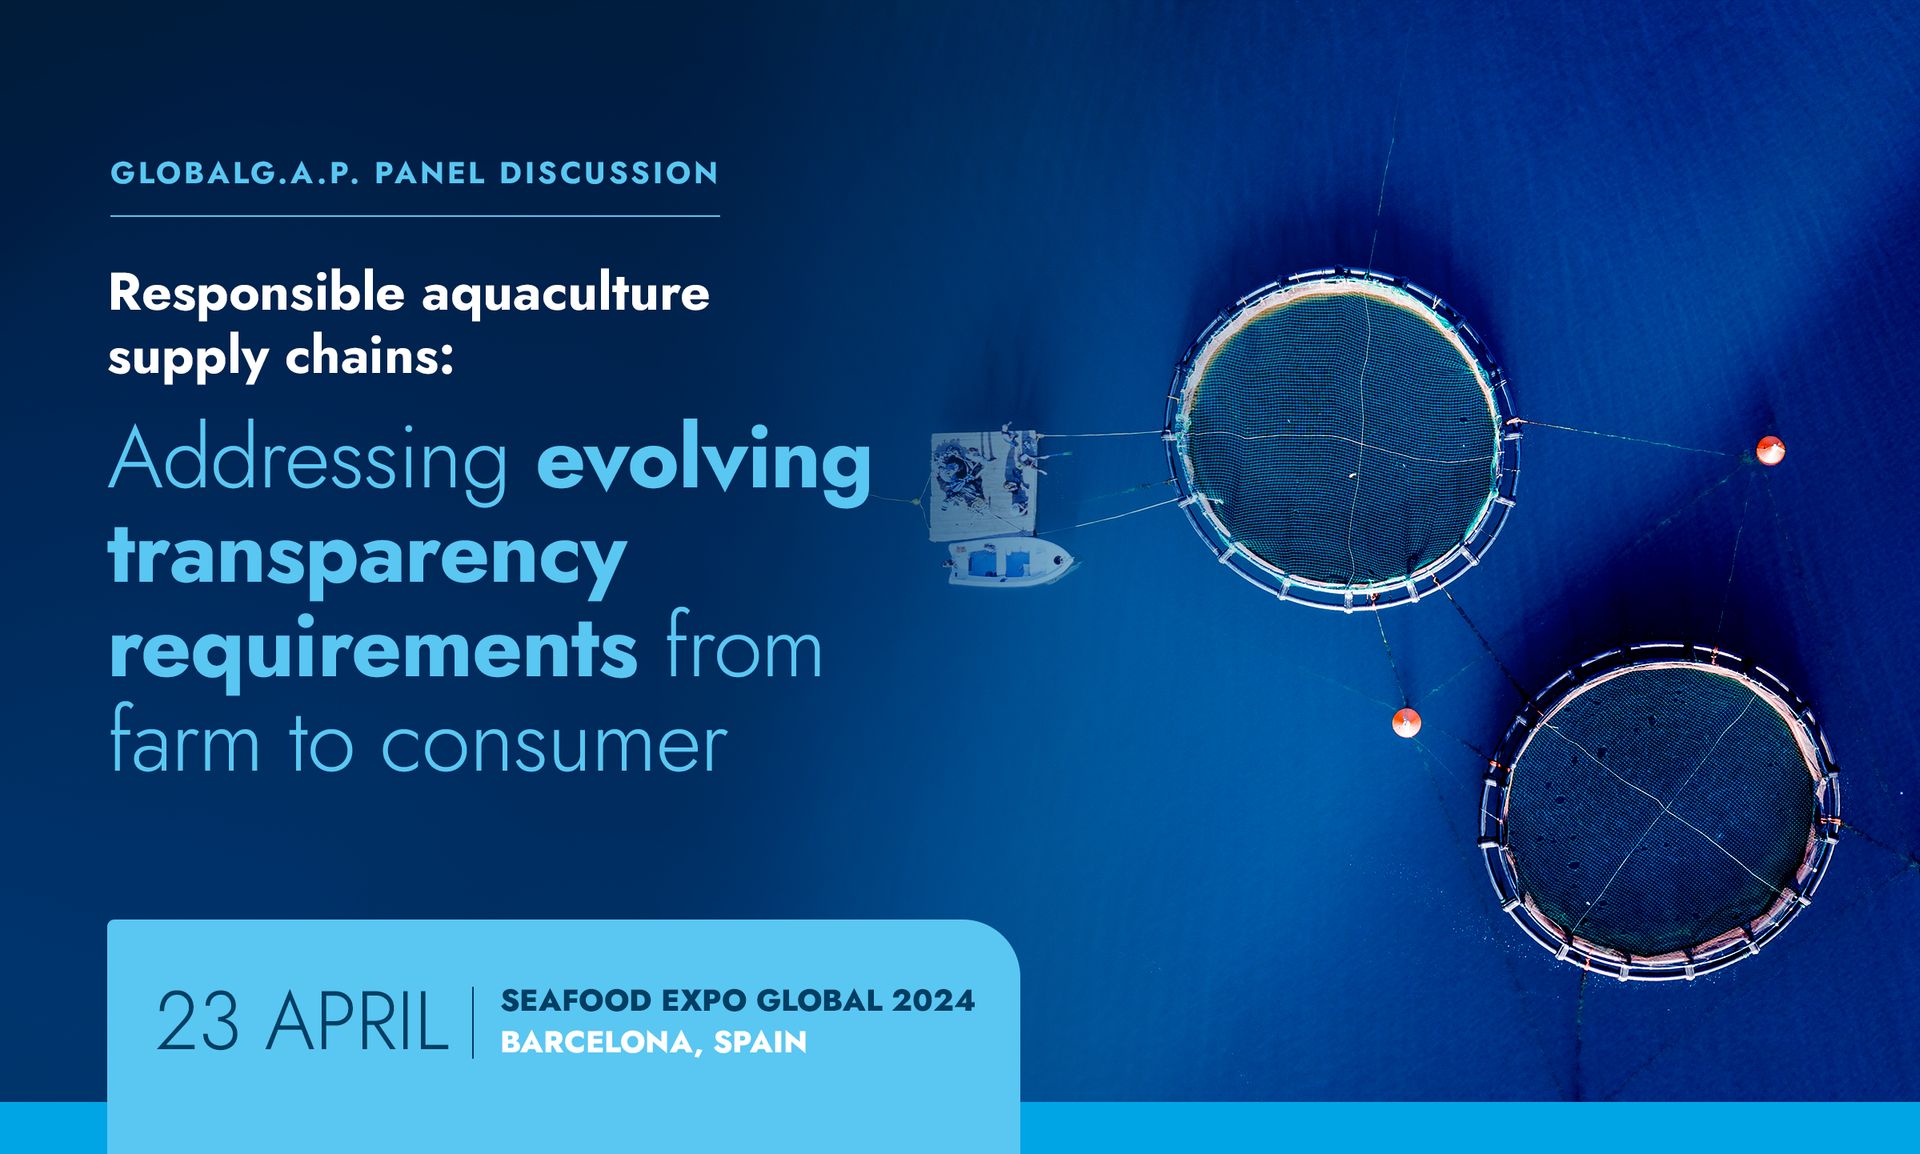 GLOBALG.A.P. panel discussion | Responsible aquaculture supply chains: Addressing evolving transparency requirements from farm to consumer | 23 April | Seafood Expo Global 2024 | Barcelona, Spain